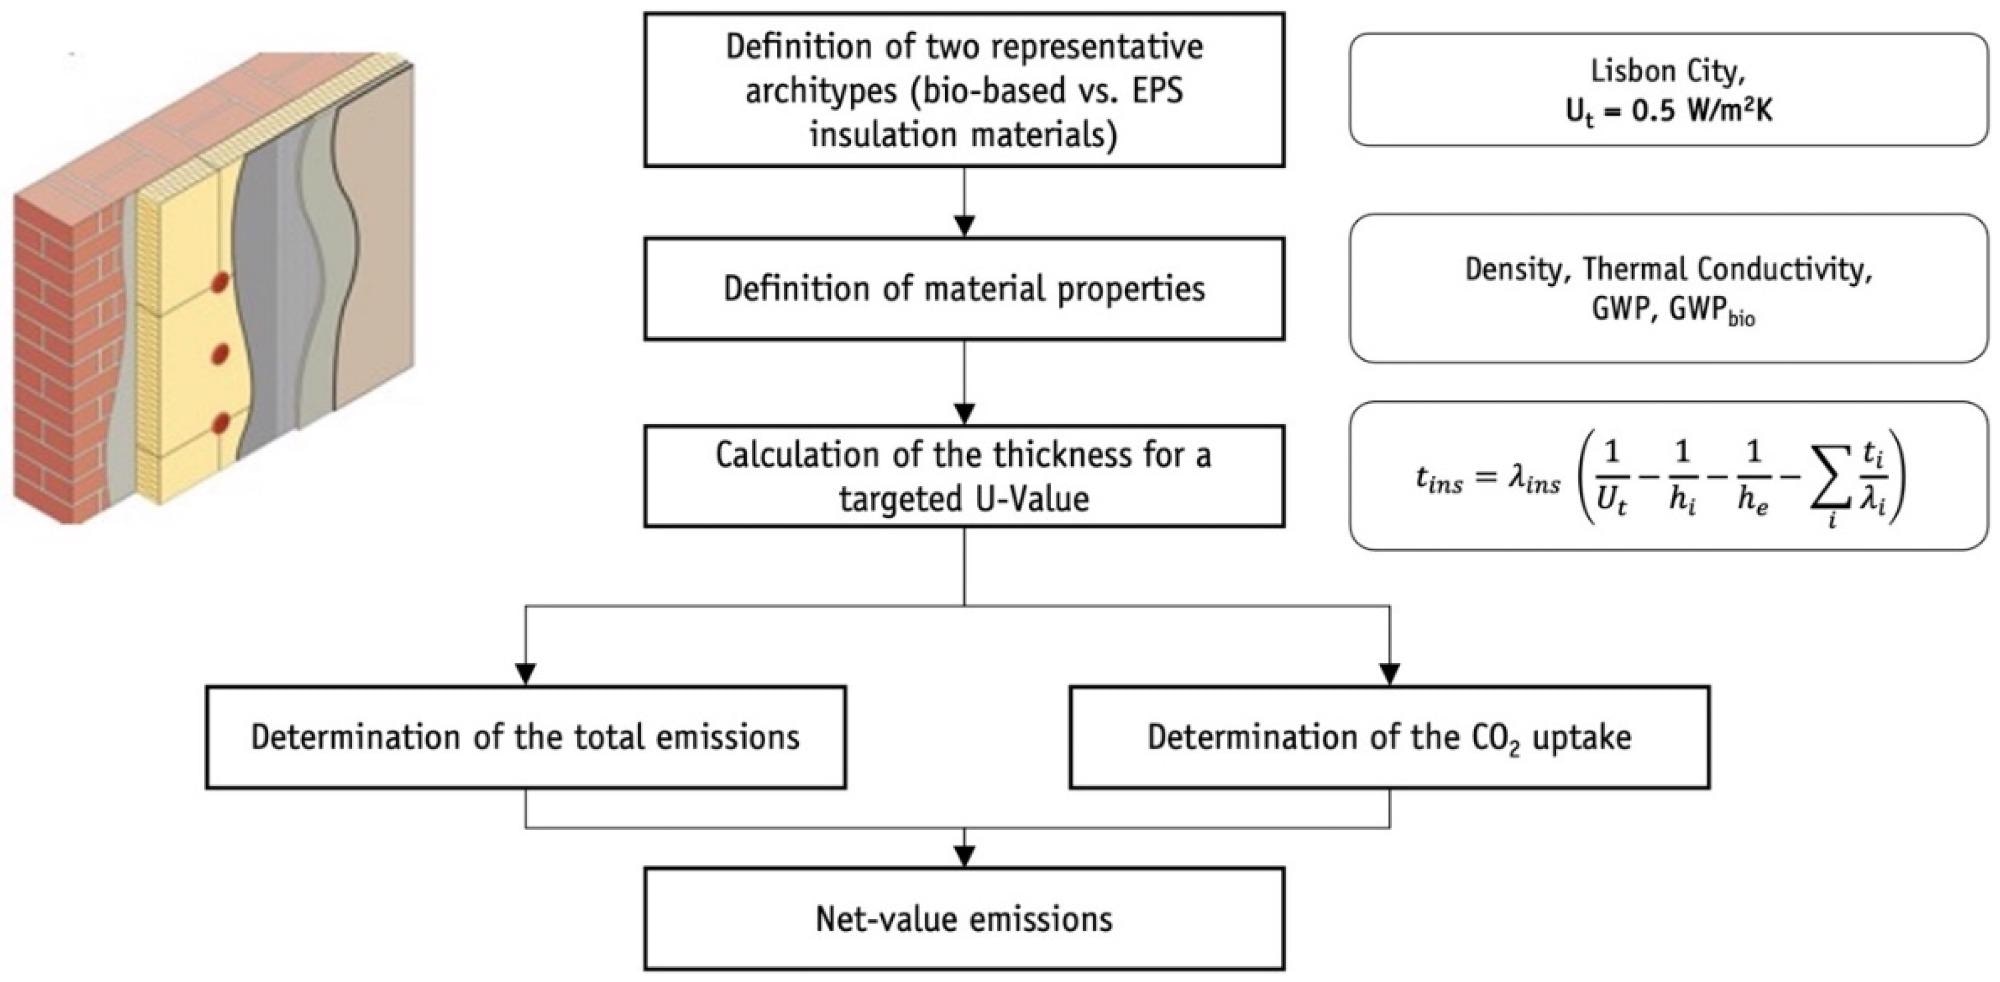 Methodological approach for the comparative carbon footprint assessment of a 1 m2 renovated wall.